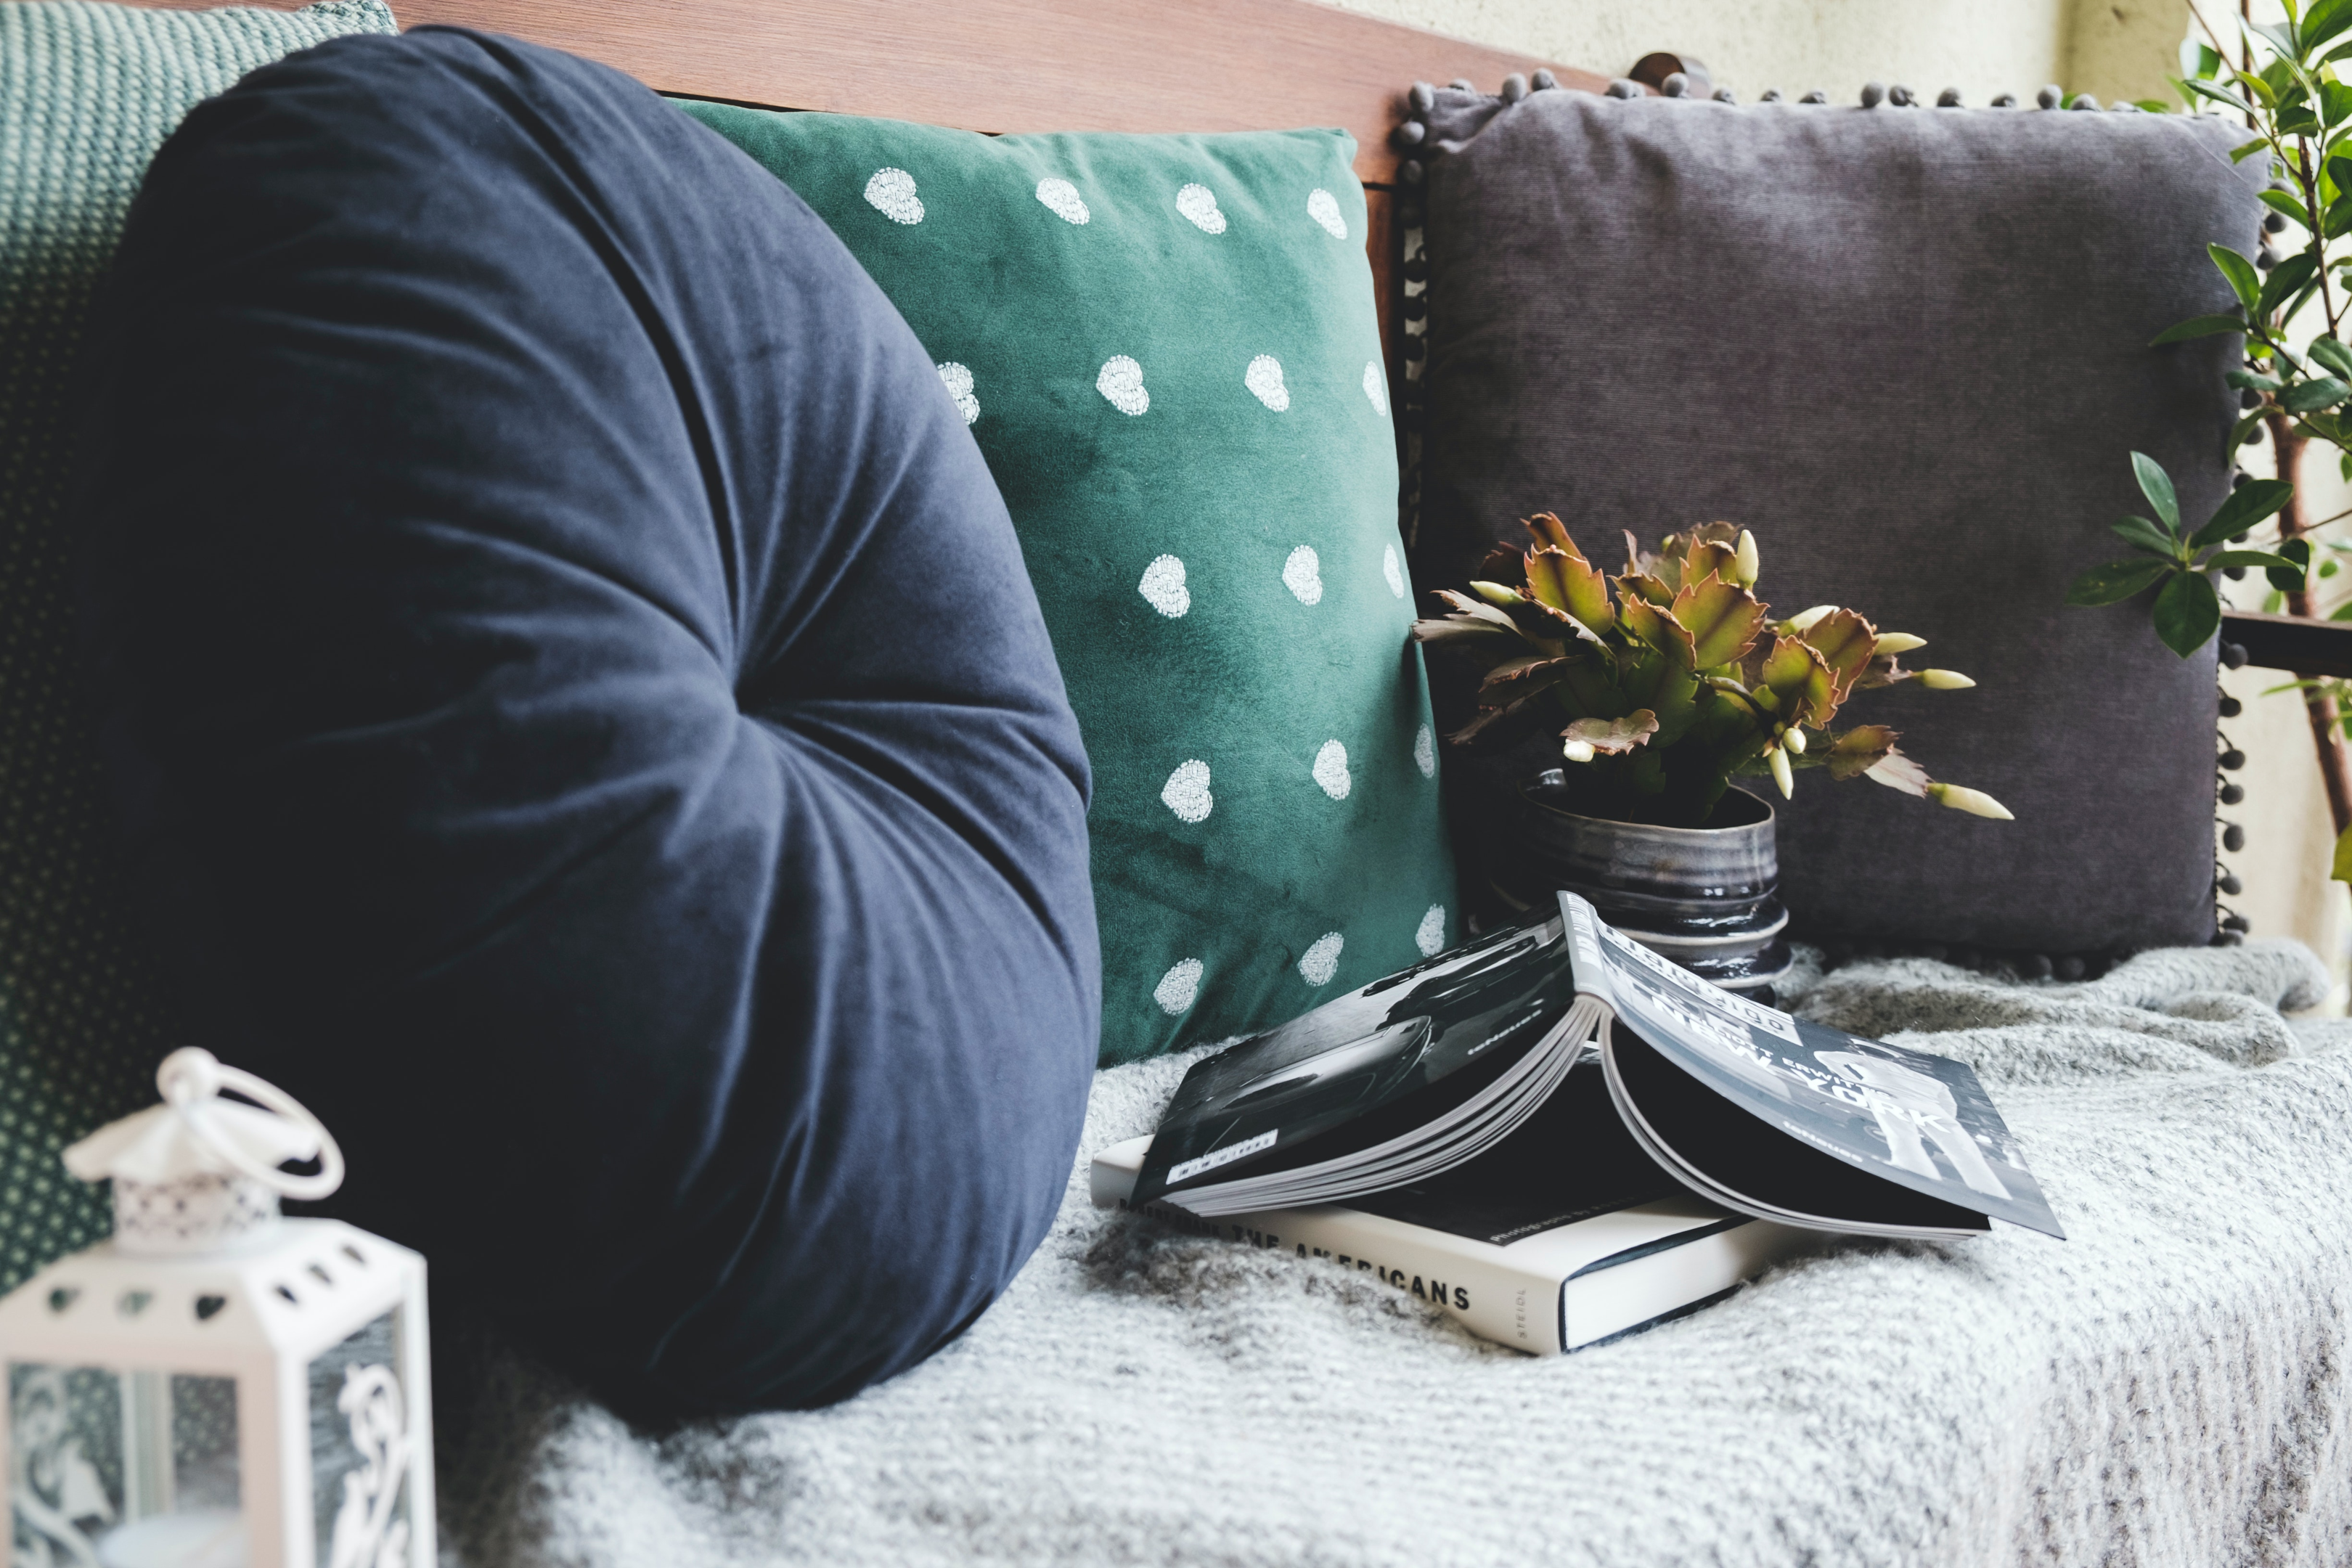 Throw pillows come in different shapes, sizes, and colors | Photo by Krisztina Papp from Pexels